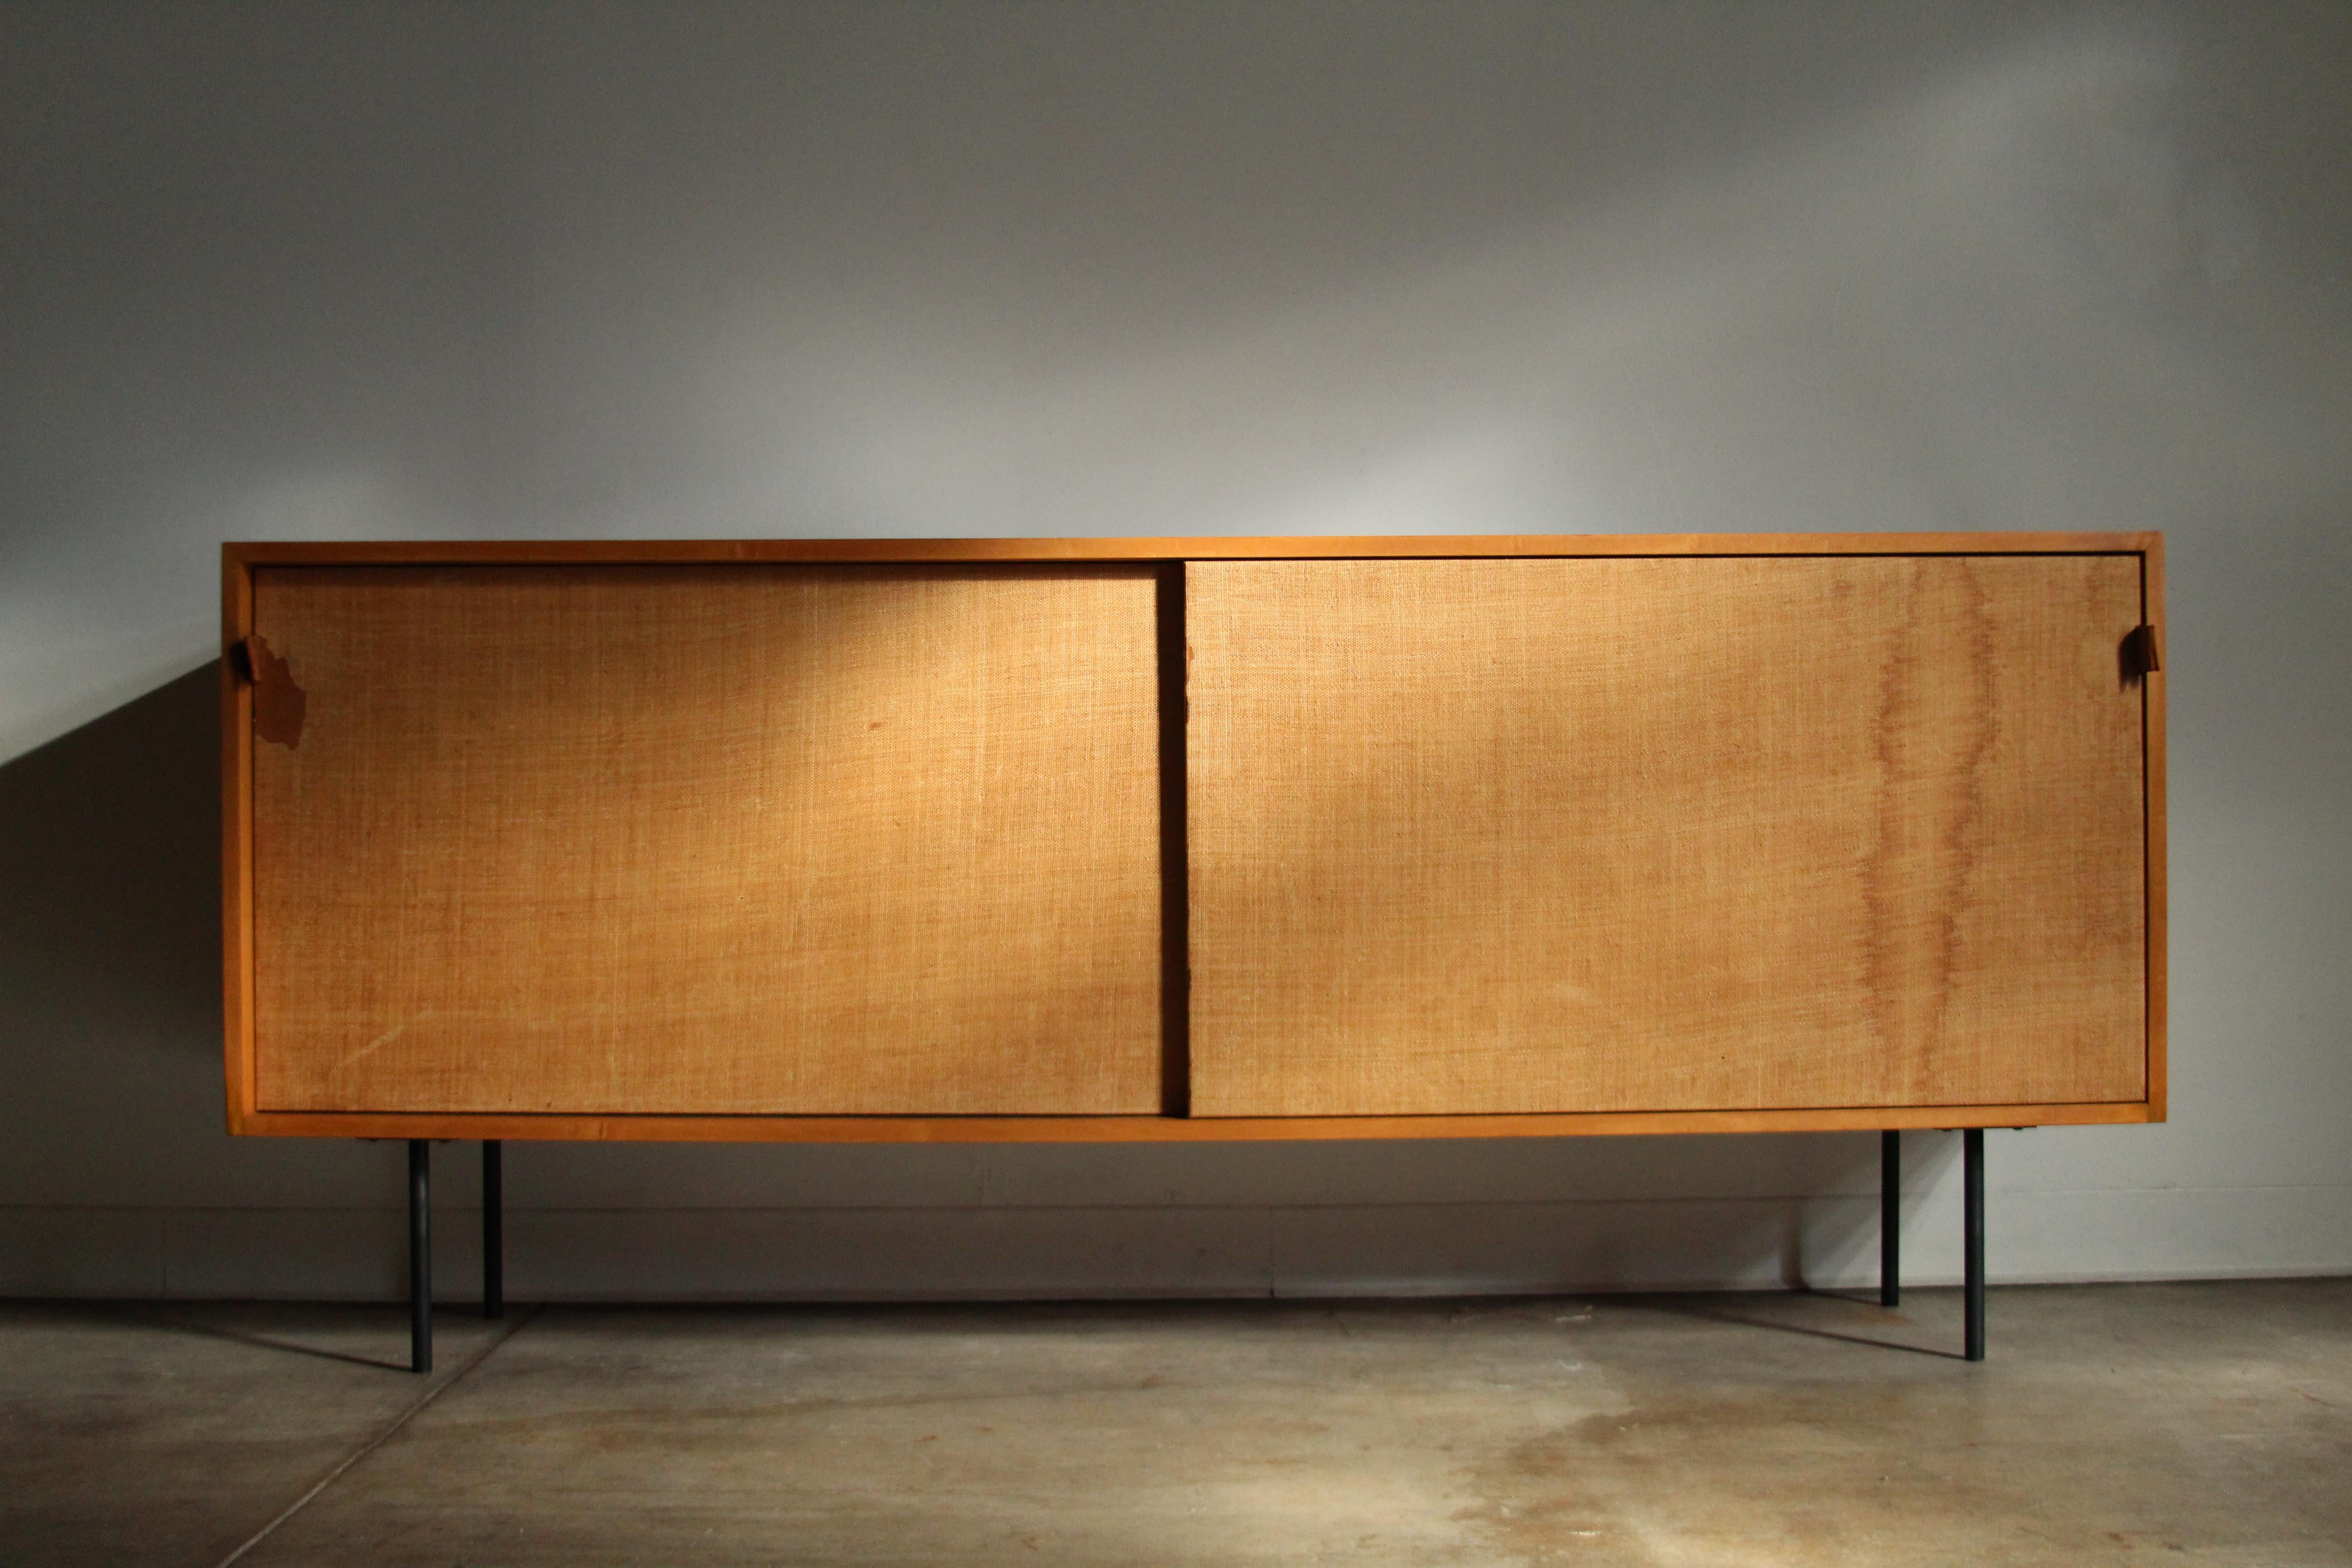 Ash, grasscloth and leather 'Model 116' cabinet designed by Florence Knoll in 1948 for Knoll Associates. The credenza features a pair of sliding doors with original grasscloth fronts and stunning, hand stitched saddle leather handles, opening to a